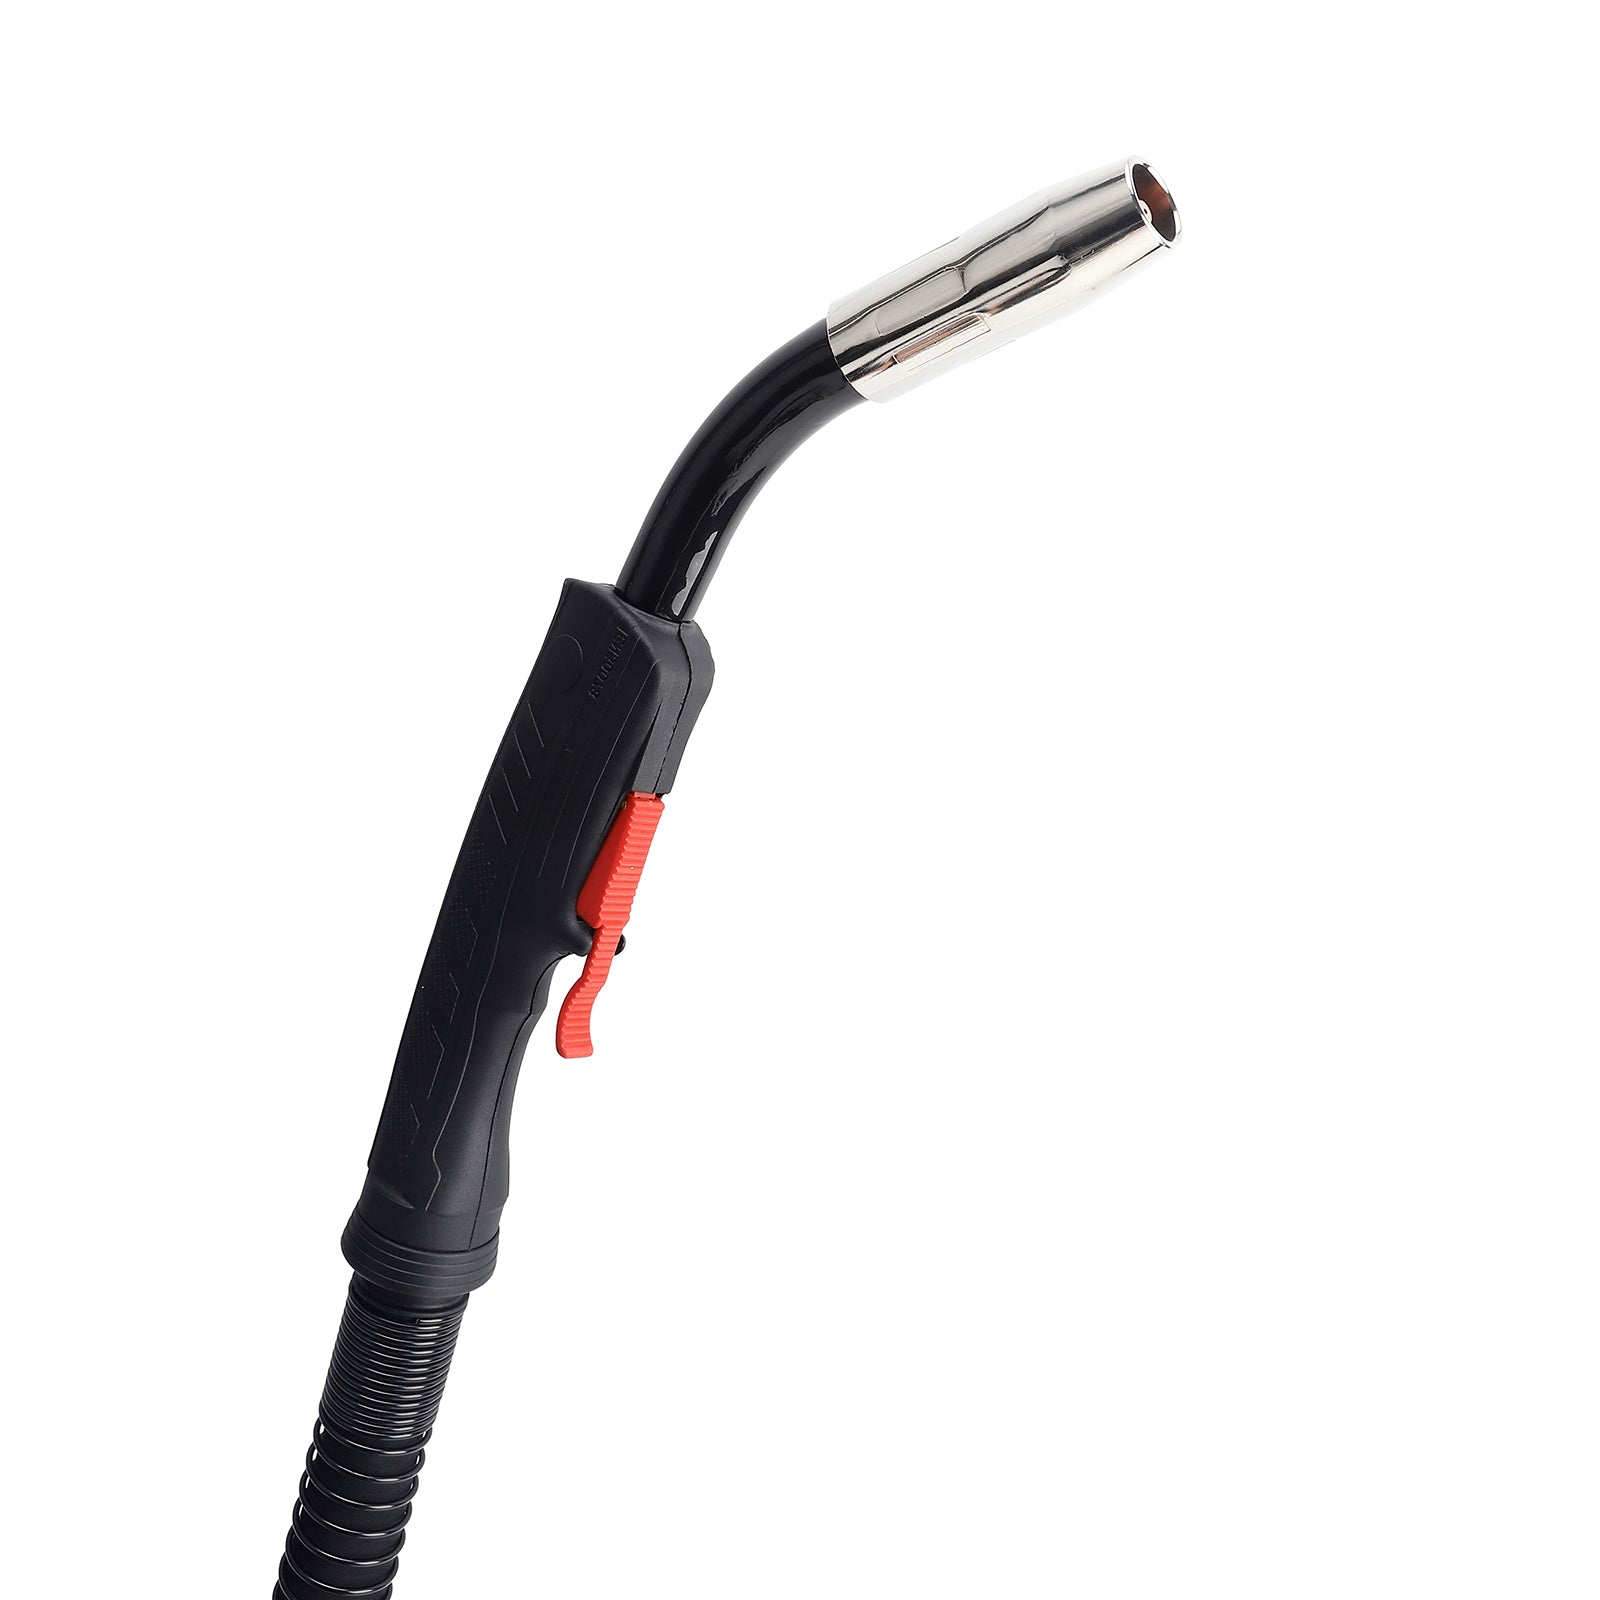 Vanes Electric MIG Welding Torch | High-Performance & Robust | Trafimet Maxi4000 Compatible